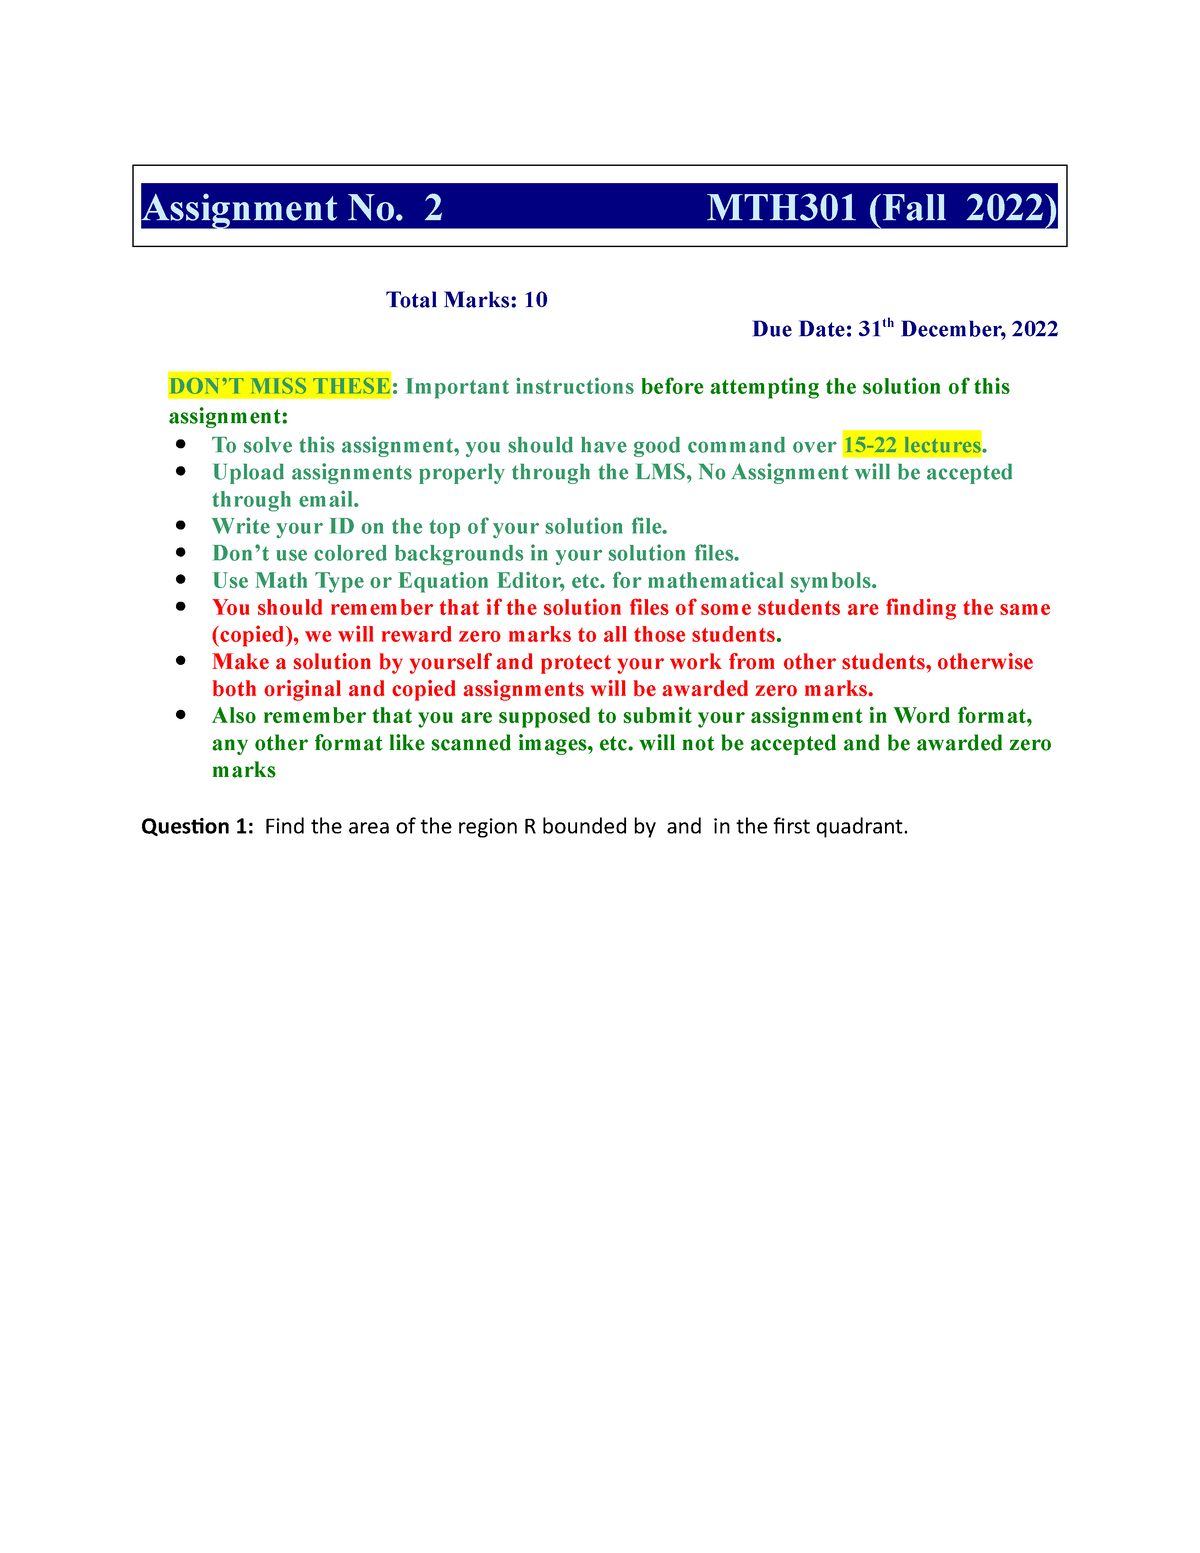 mth301 assignment 2 solution 2022 pdf